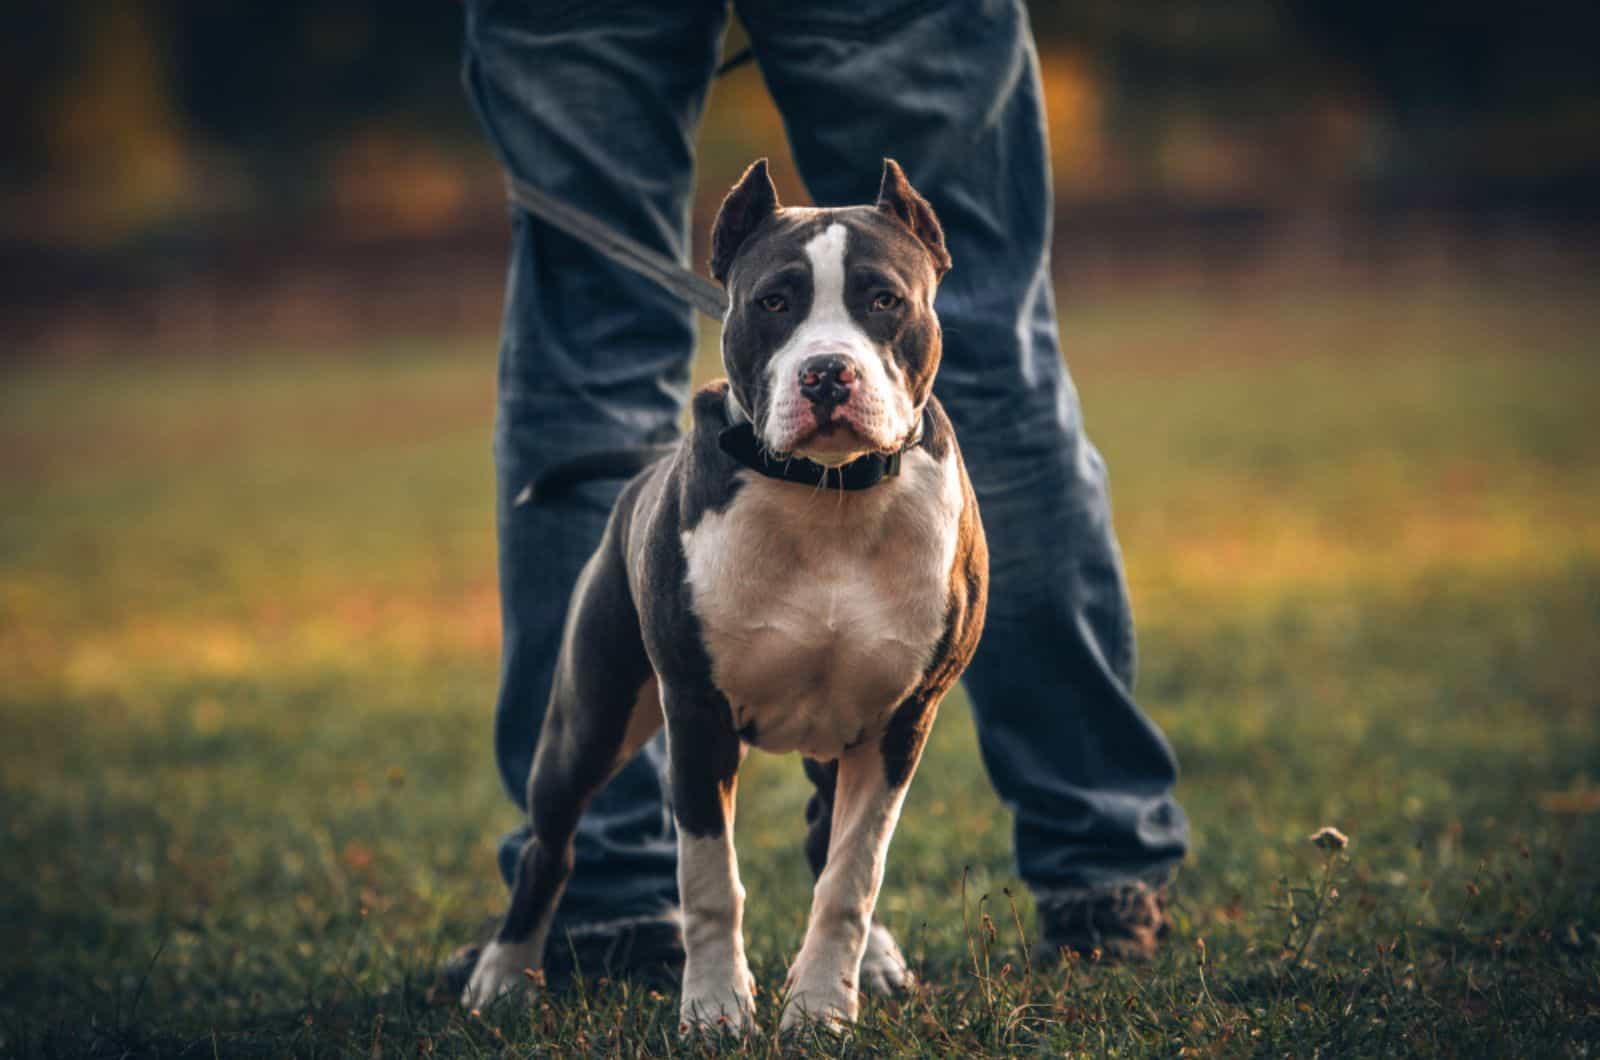 pitbull standing in front of his owner in the park